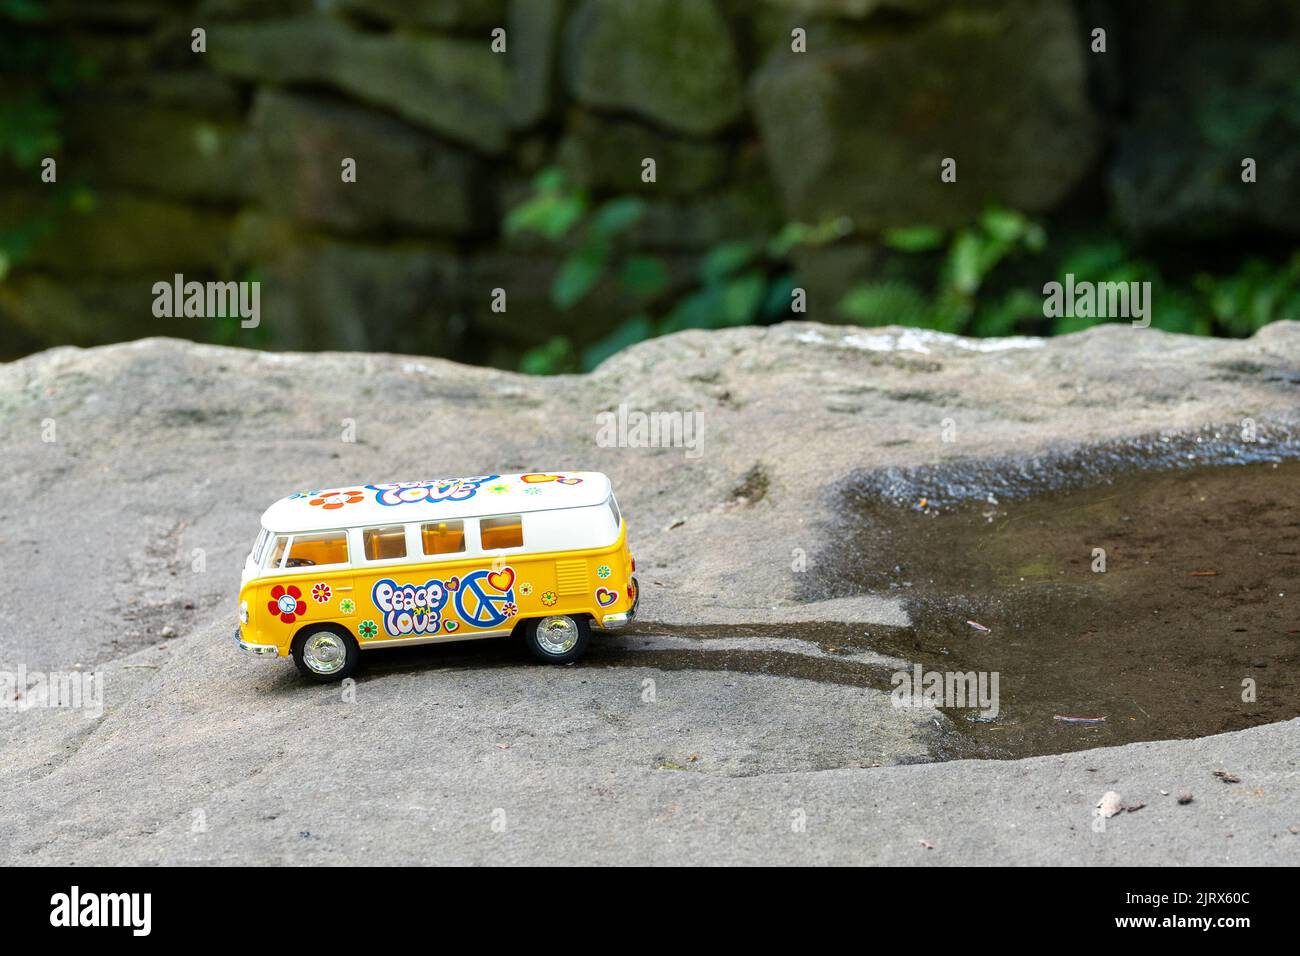 Yellow VW camper van model bus, in a nature scene, on a rock, driving out of a puddle of water. Stock Photo